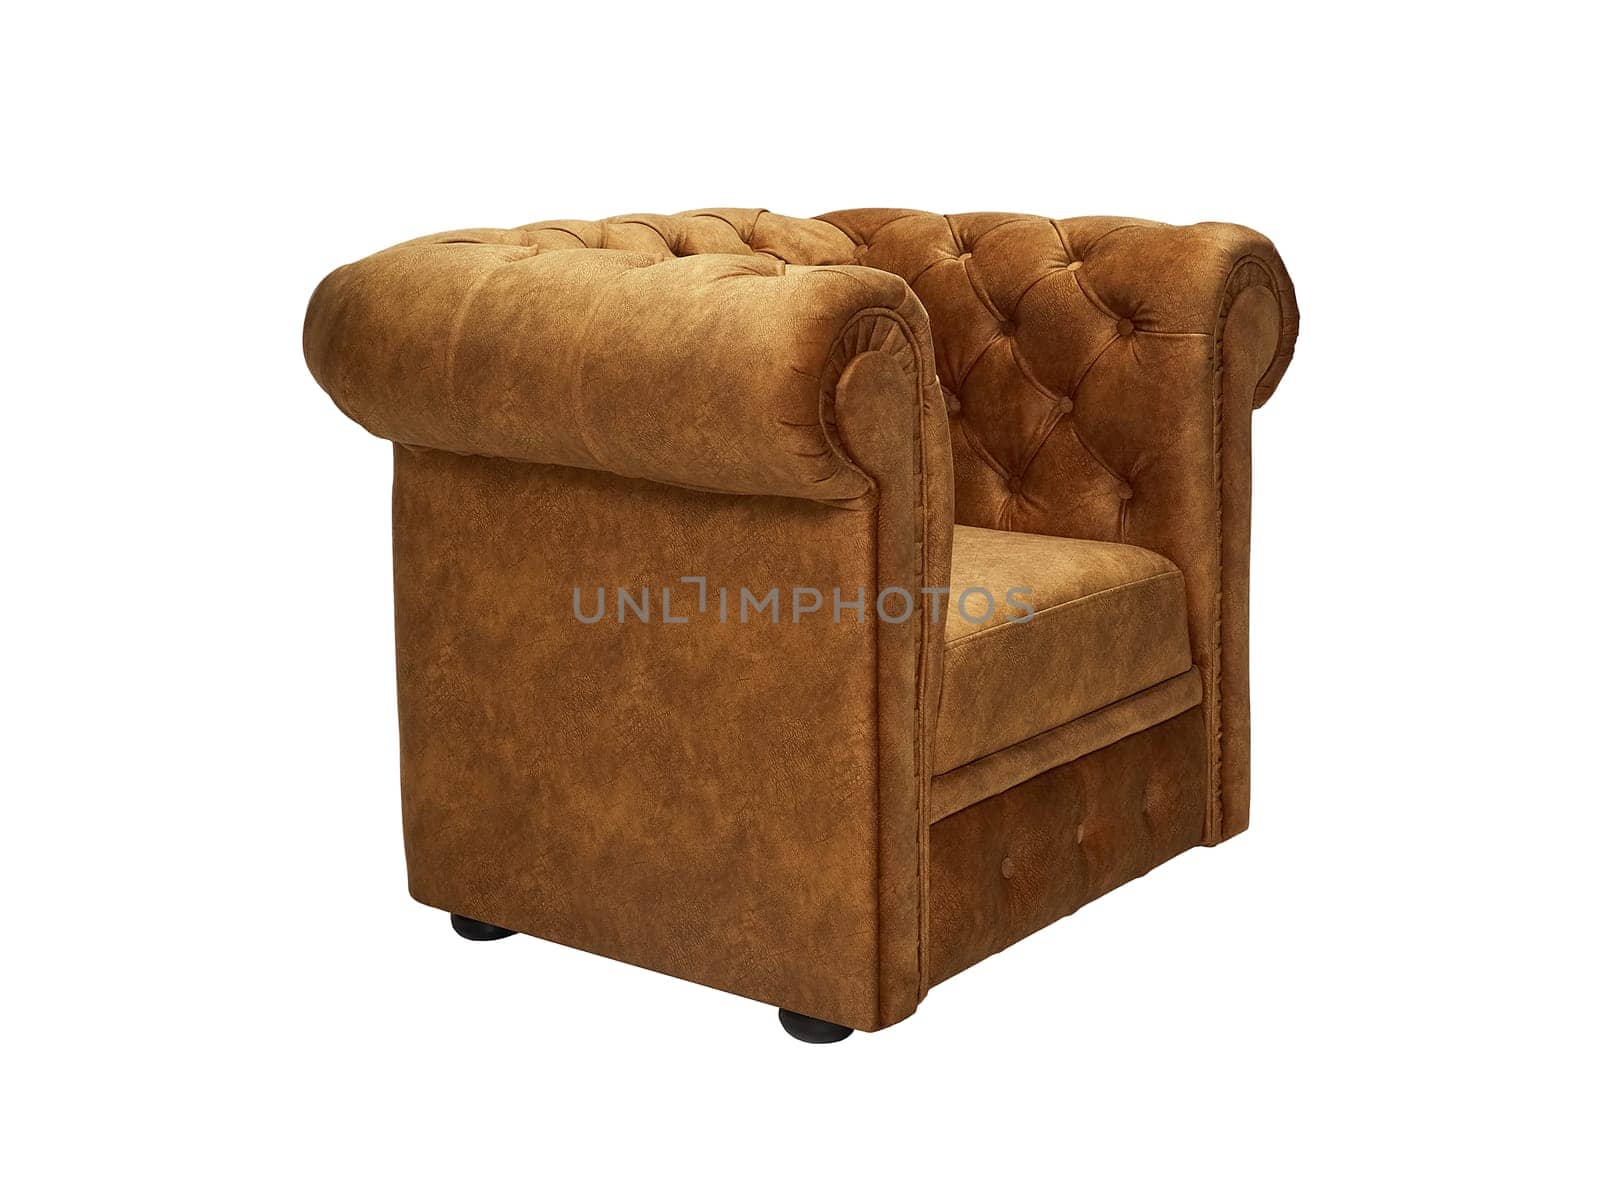 vintage brown leather armchair isolated on white background, side view.